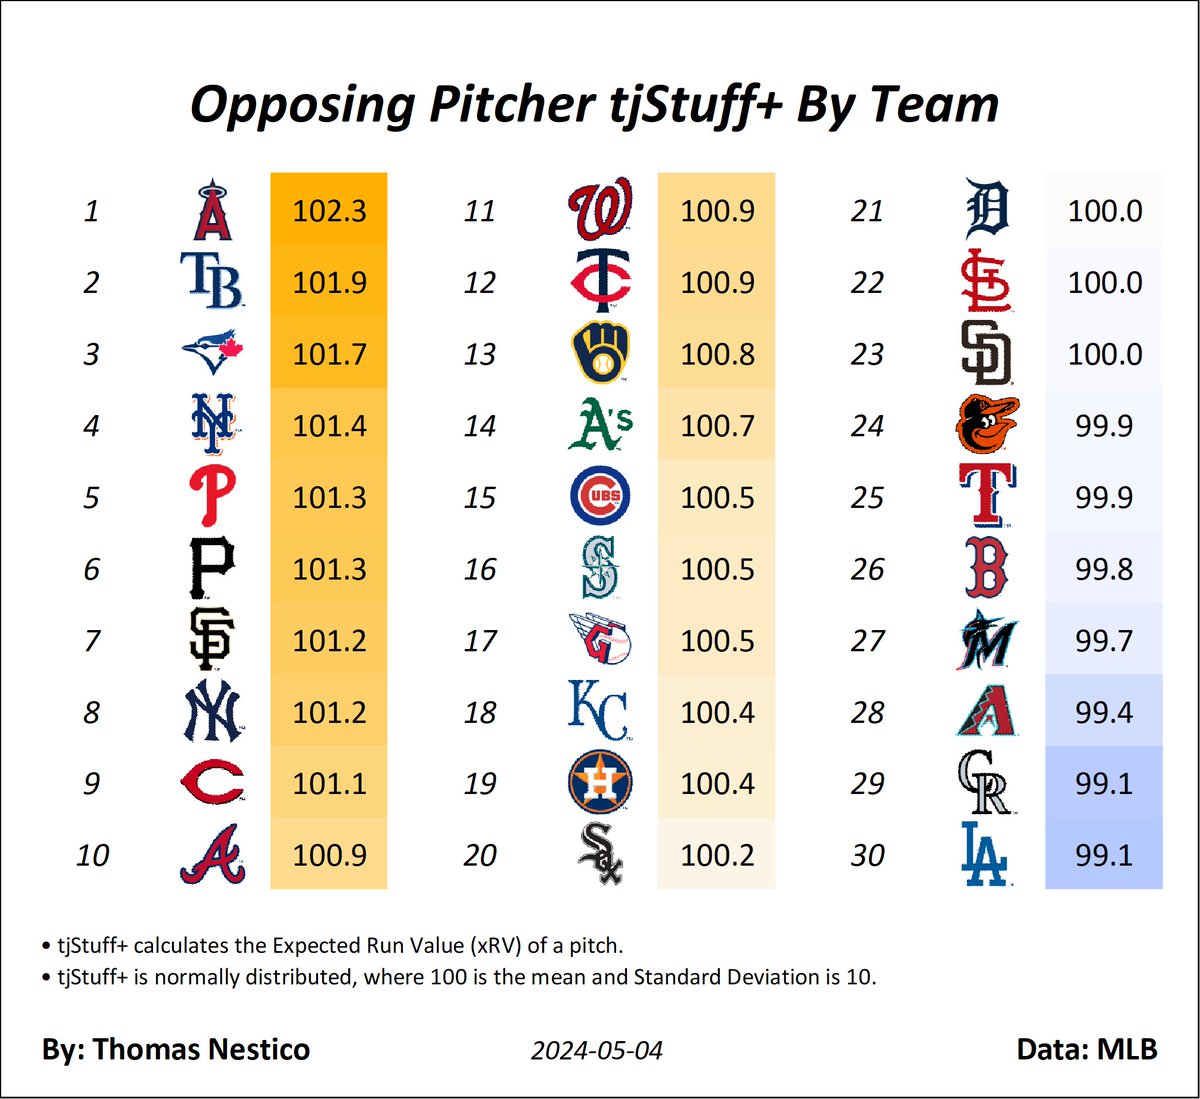 Opposing Pitcher tjStuff+ By Team In summary, this graphic shows which teams have played against the toughest pitching this season according to my tjStuff+ metric